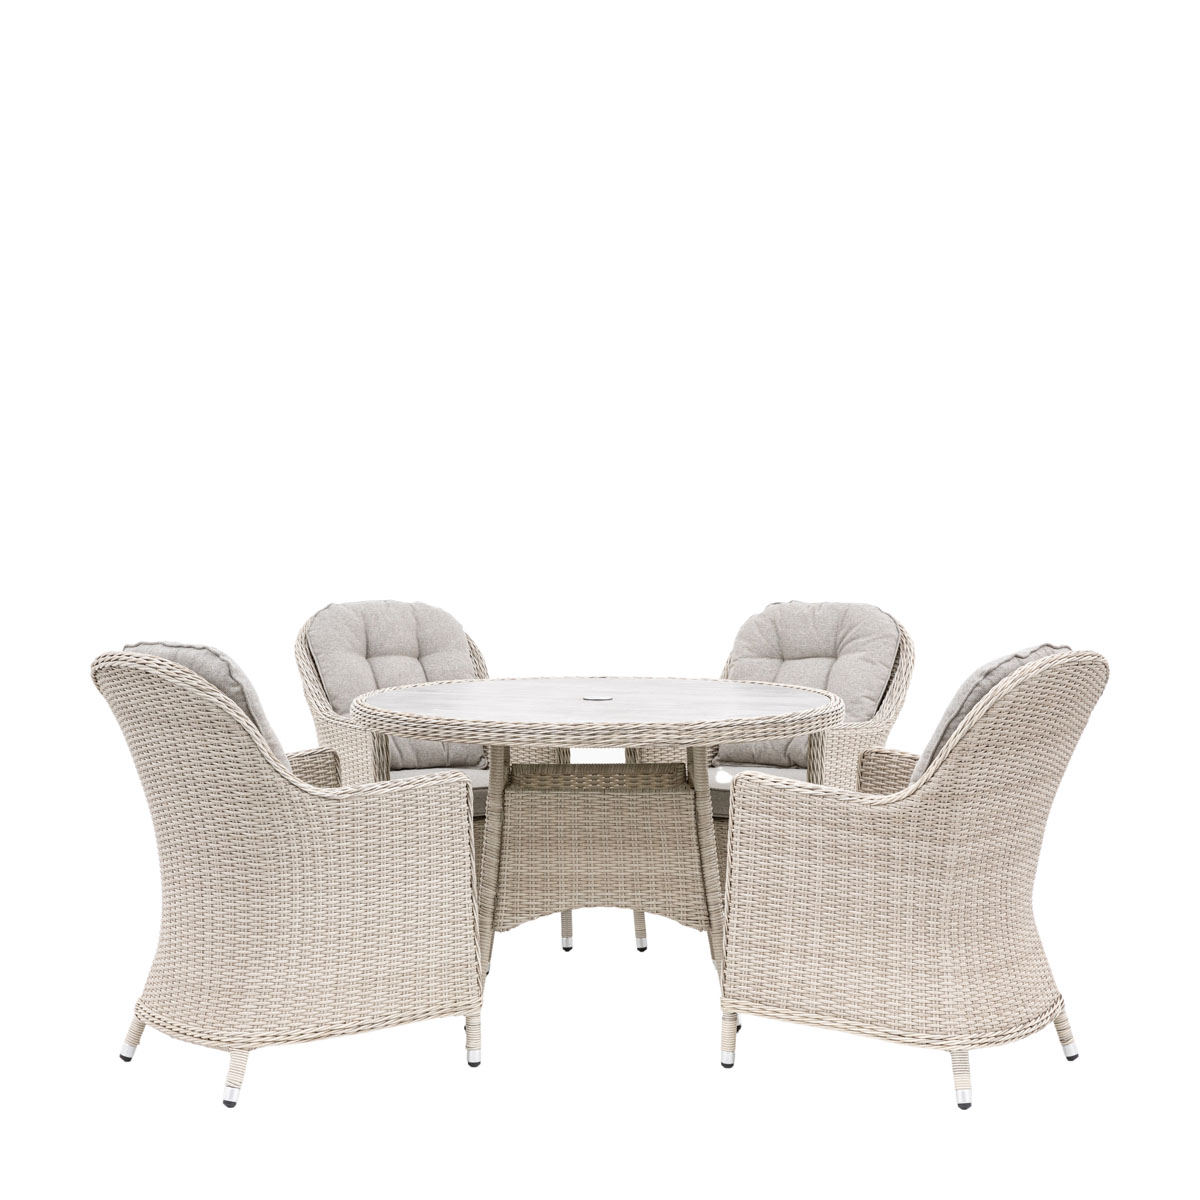 Holton 4 Seater Round Dining Set